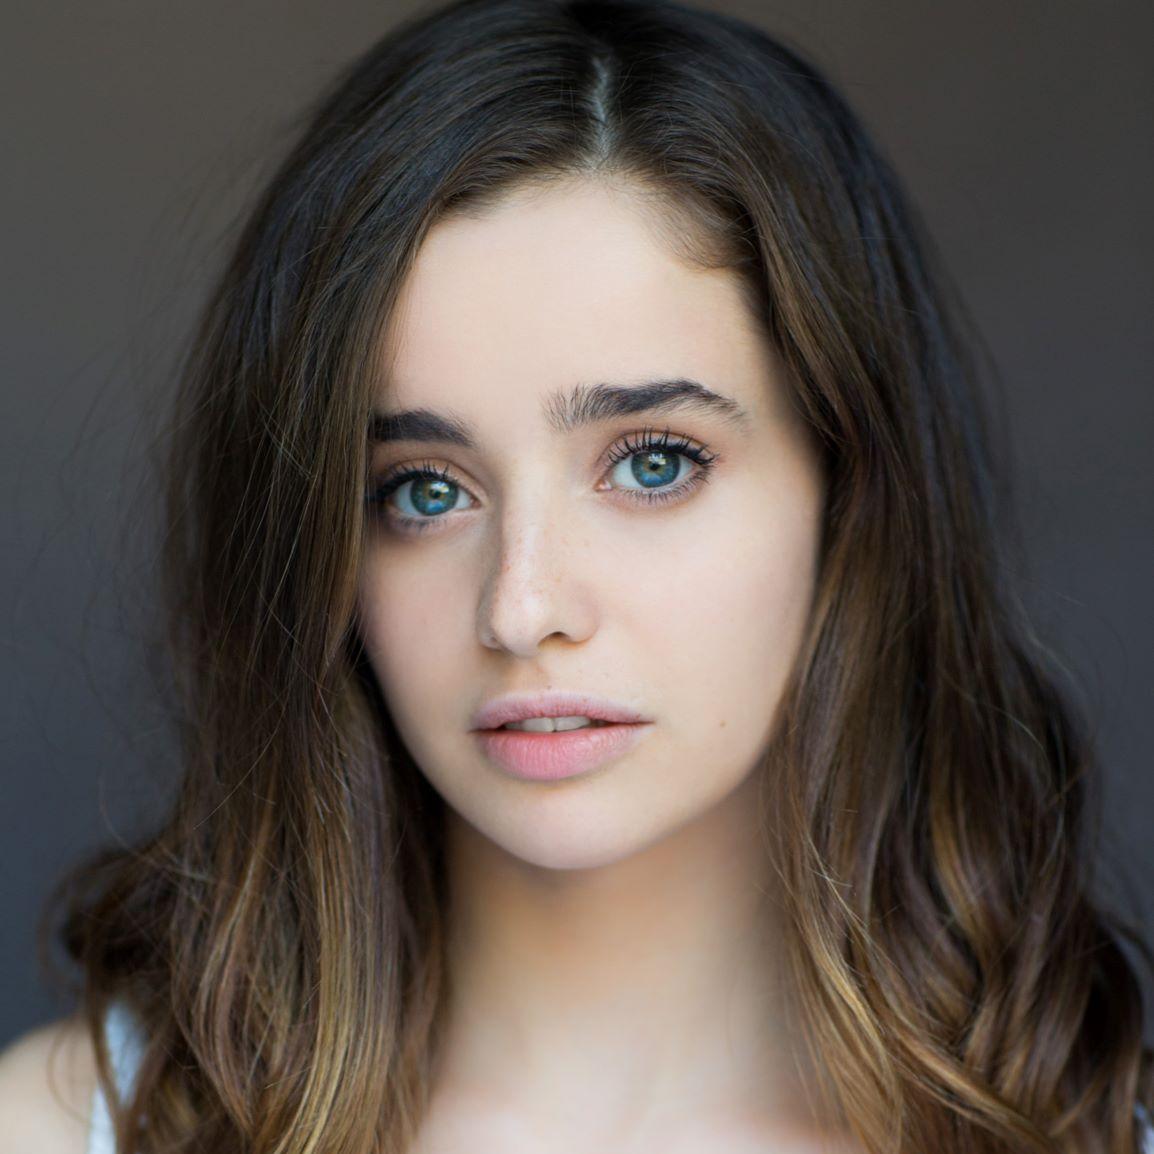 Humans holly earl 